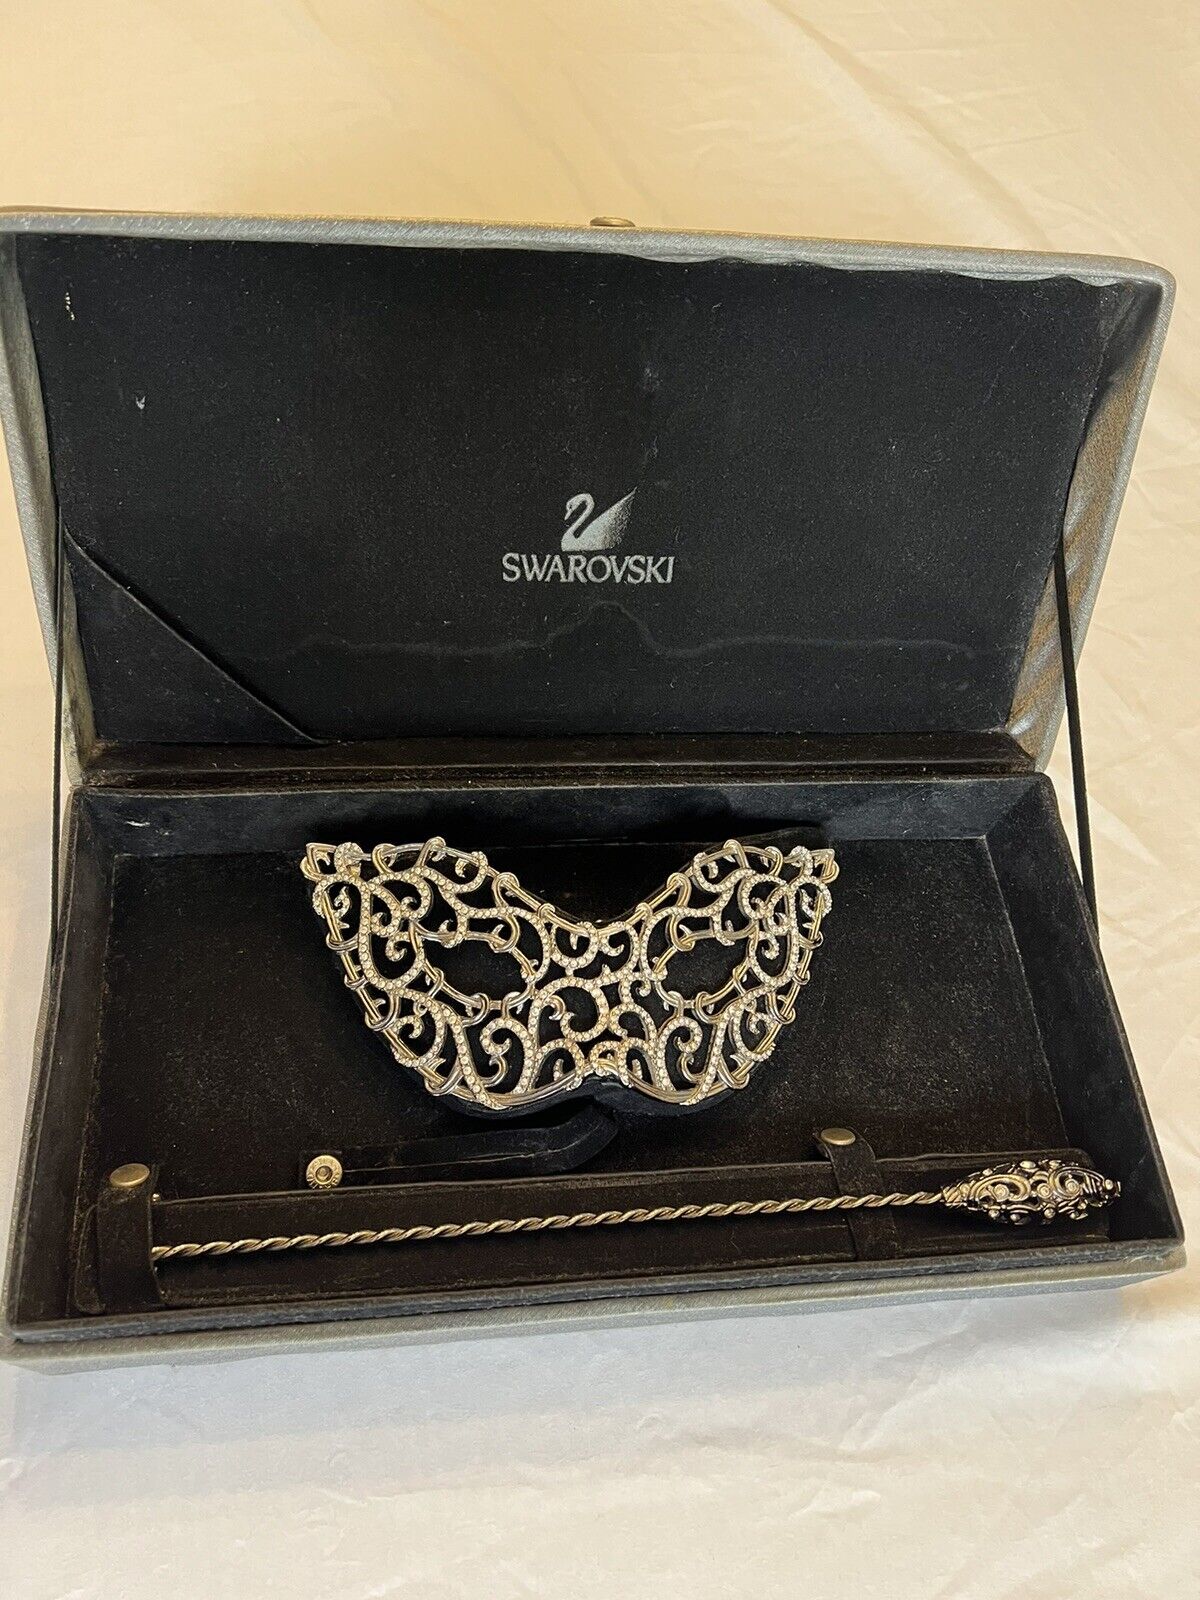 SWAROVSKI  CRYSTAL MASK & WAND “RARE” LIMITED EDITION IN ORIGINAL BOX  - AS IS